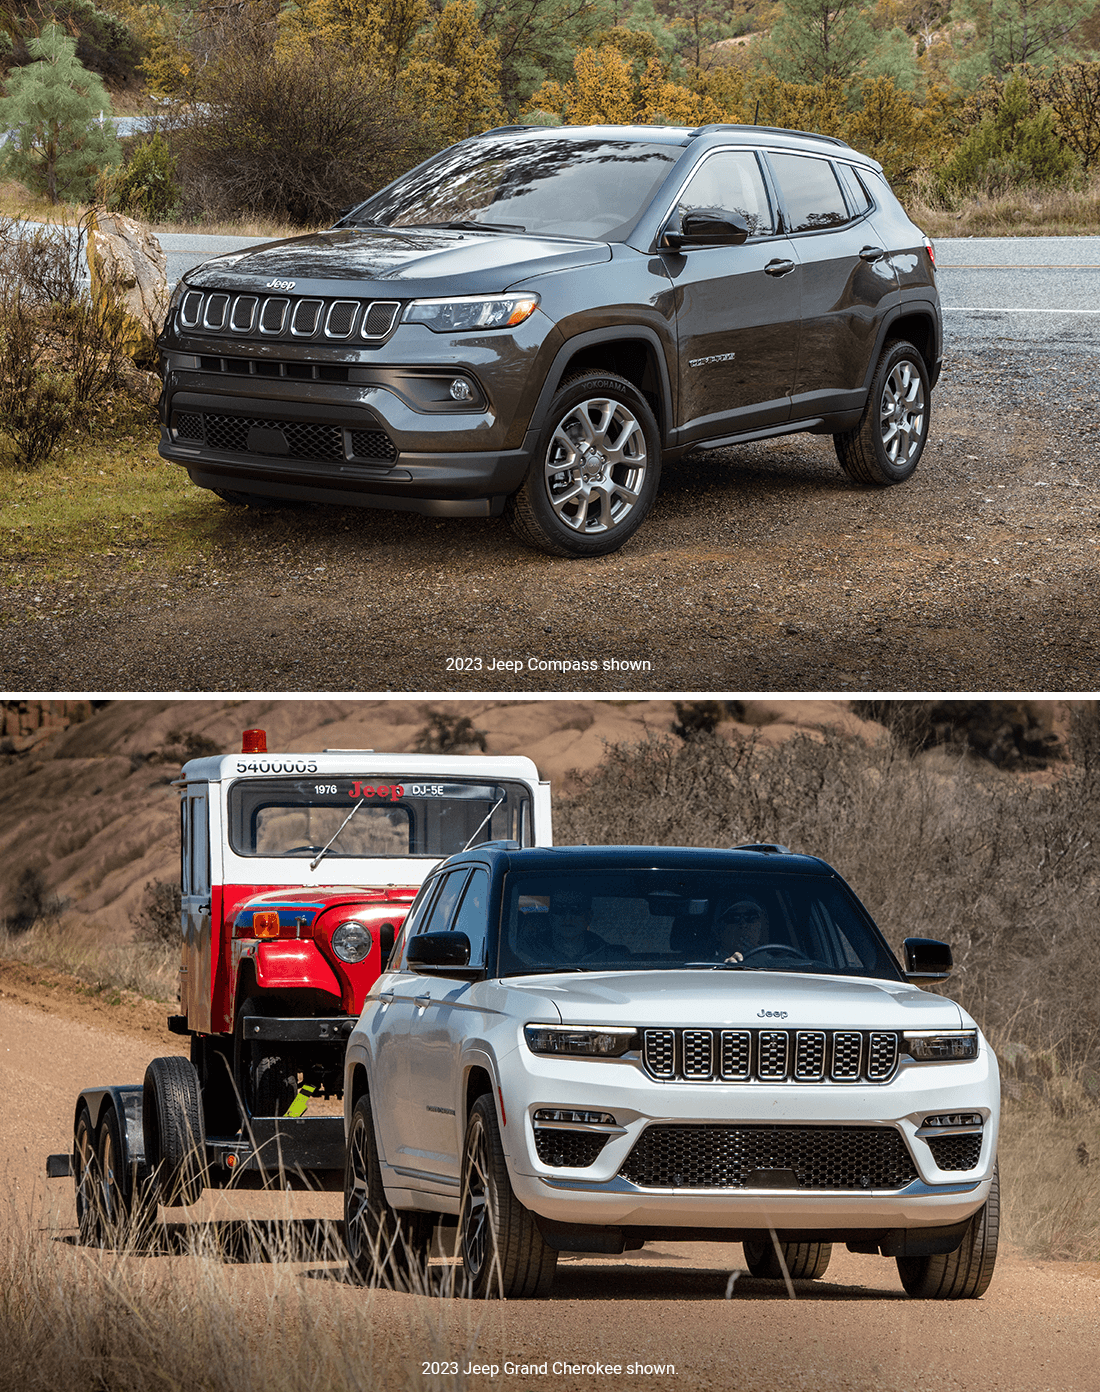 Jeep Compass Vs. Jeep Grand Cherokee Which Is Right for You?